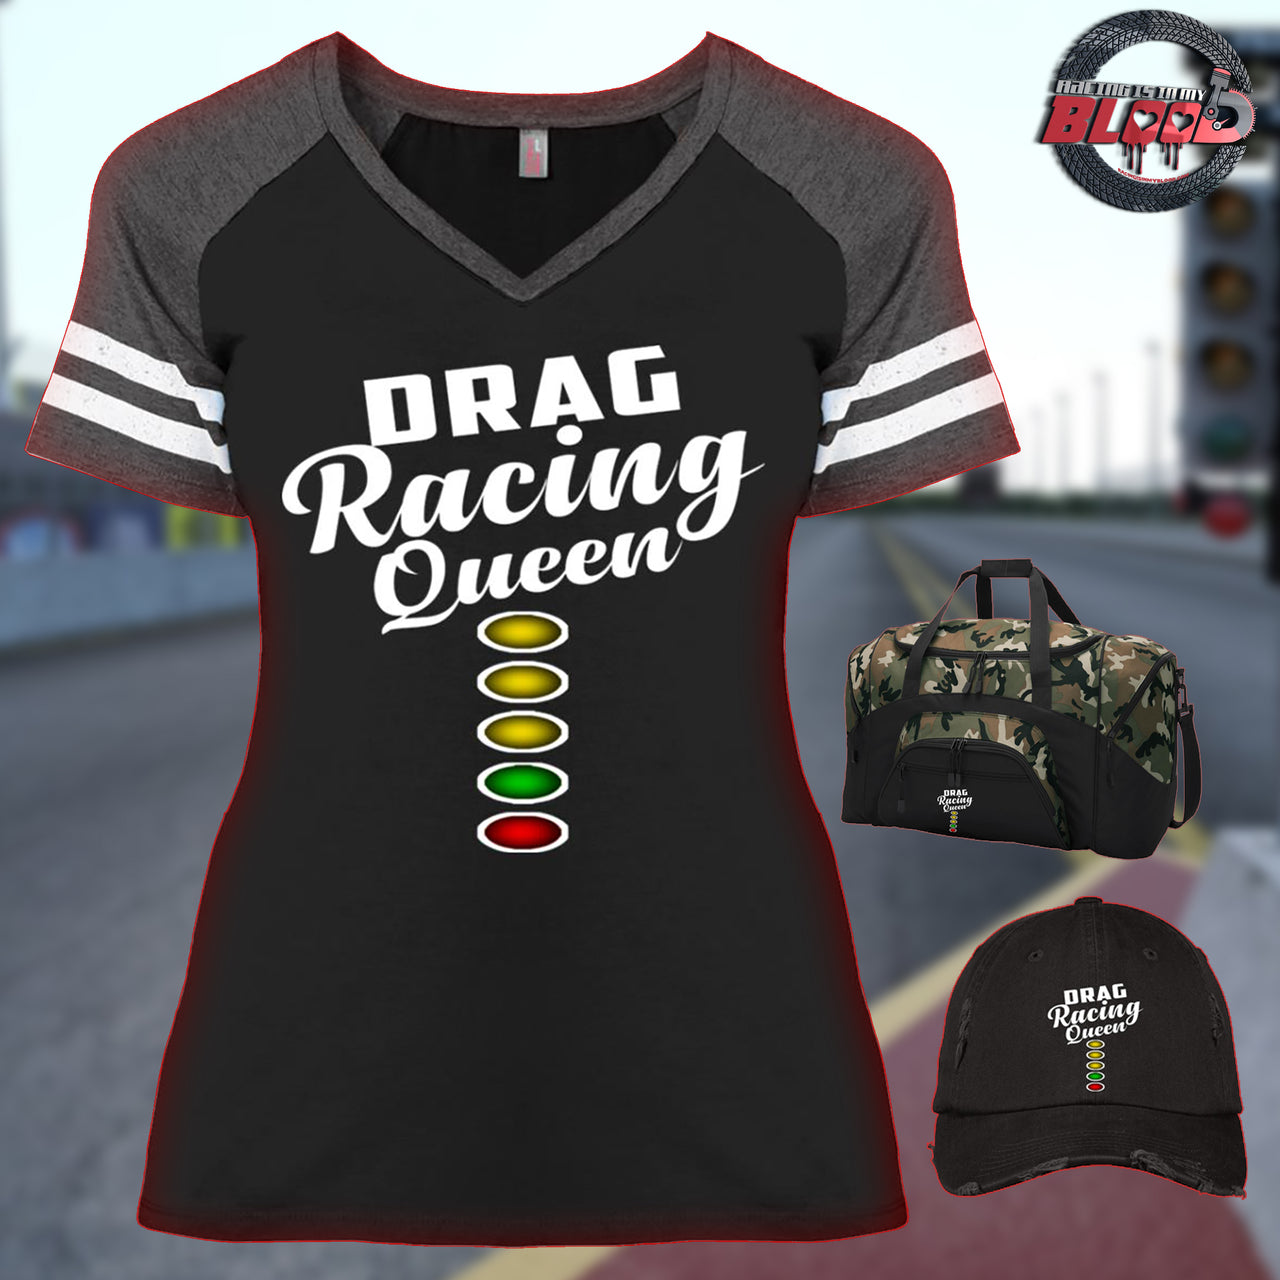 Drag Racing Queen Products Collection.